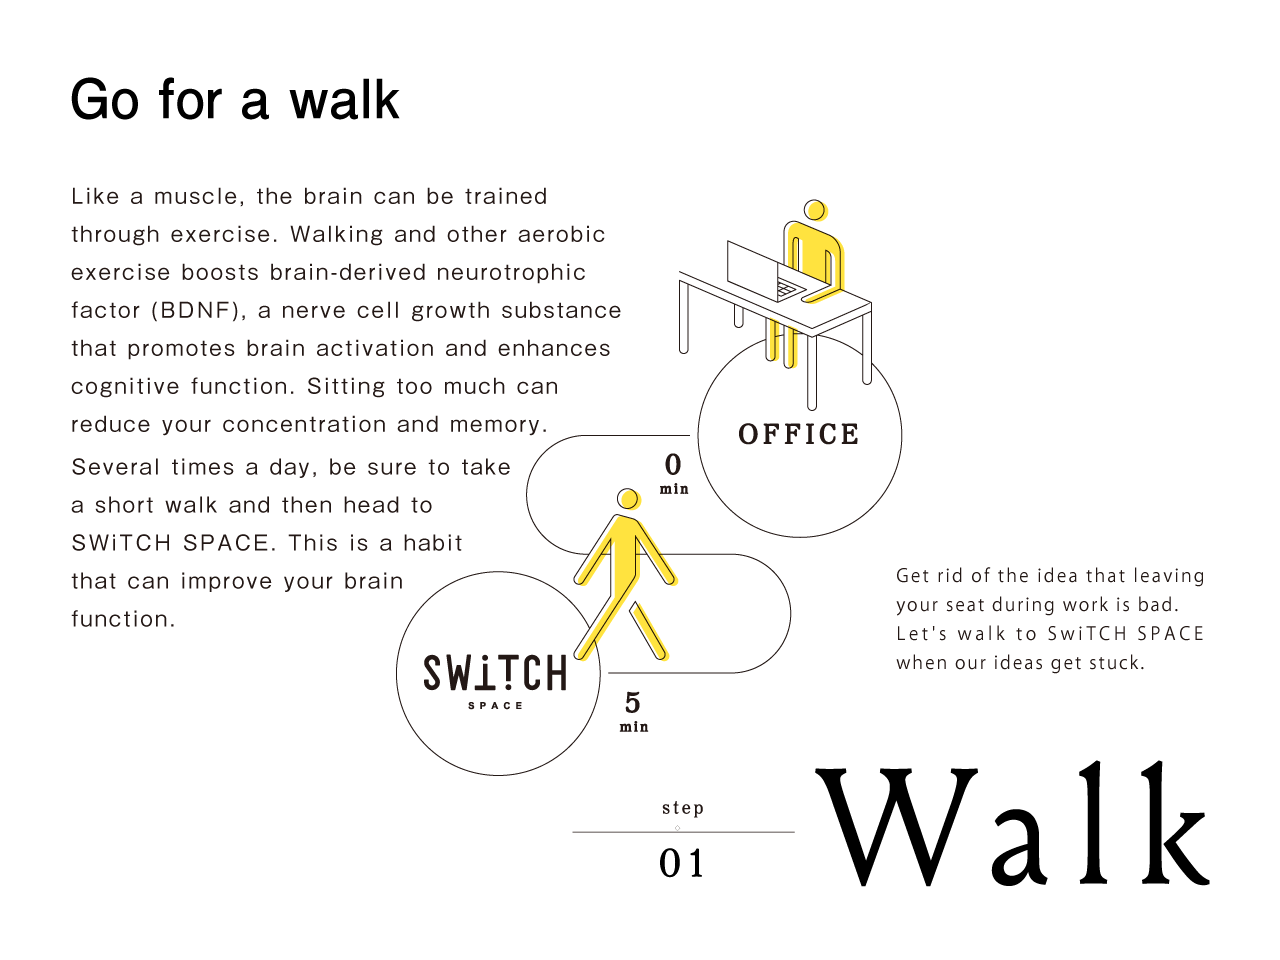 step01 Waik | Go for a walk　Like a muscle, the brain can be trained through exercise. Walking and other aerobic exercise boosts brain-derived neurotrophic factor (BDNF), a nerve cell growth substance that promotes brain activation and enhances cognitive function. Sitting too much can reduce your concentration and memory. Several times a day, be sure to take a short walk and then head to SWiTCH SPACE. This is a habit that can improve your brain function.